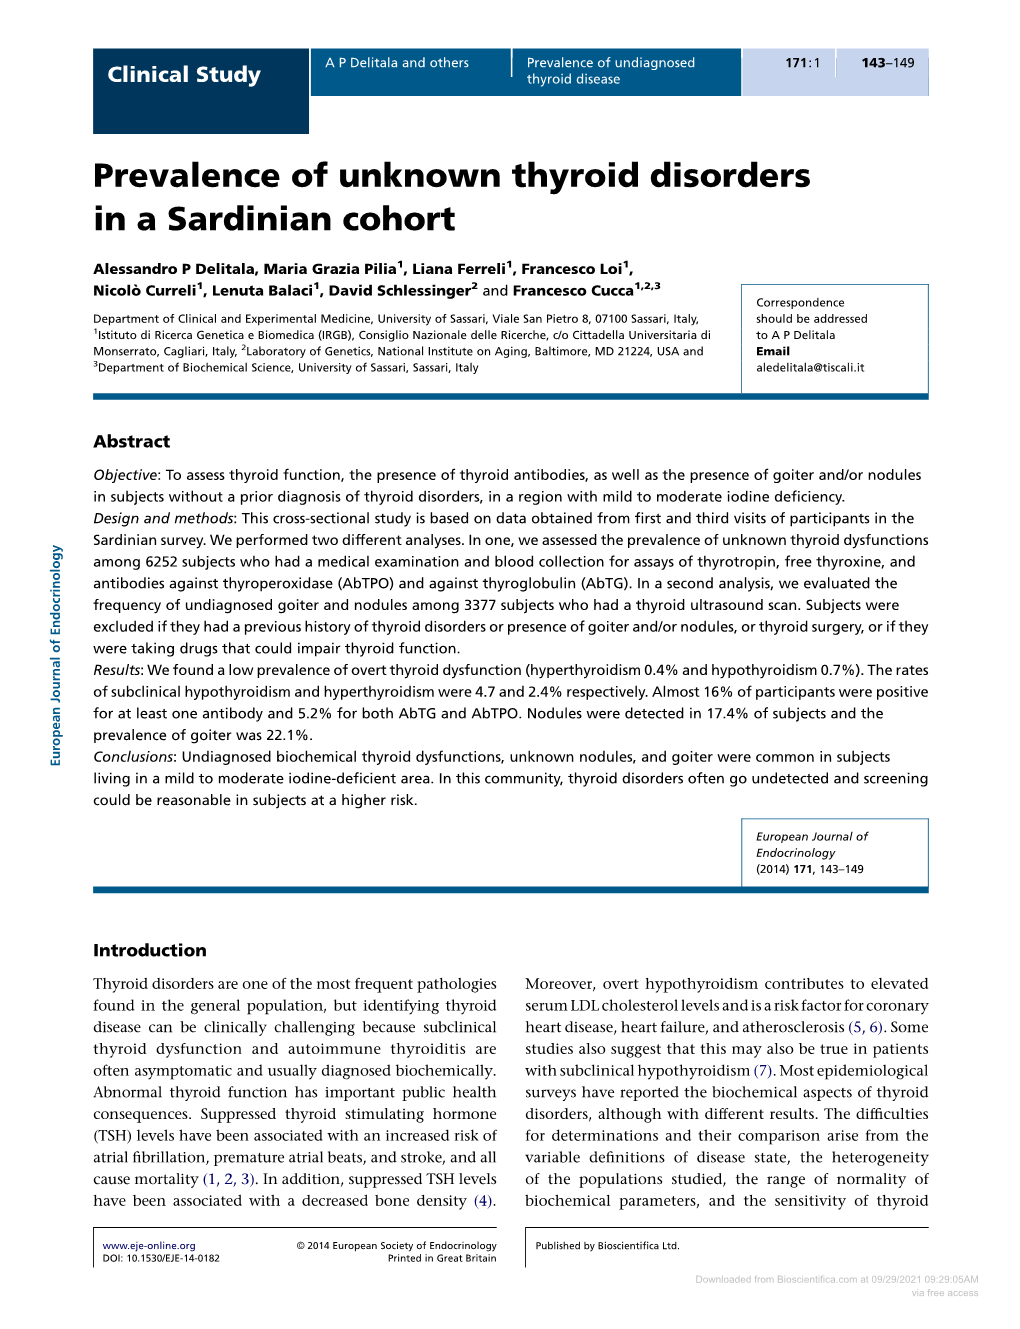 Prevalence of Unknown Thyroid Disorders in a Sardinian Cohort